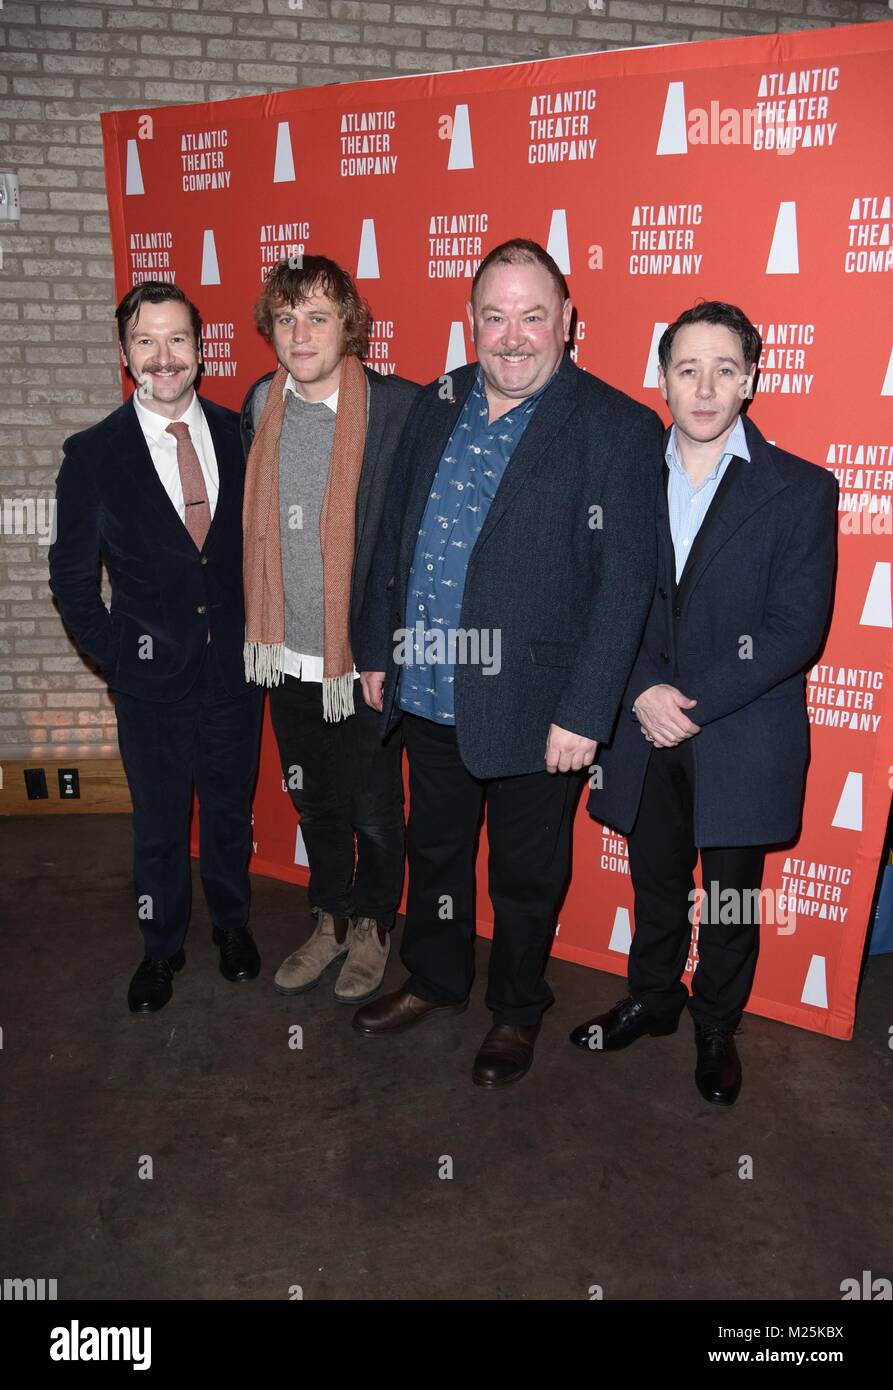 New York, NY, USA. 5th Feb, 2018. Billy Carter, Johnny Flynn, Mark Addy, Reece Shersmith at arrivals for HANGMEN Opening Night Curtain Call and Party, Linda Gross Theater, New York, NY February 5, 2018. Credit: Derek Storm/Everett Collection/Alamy Live News Stock Photo